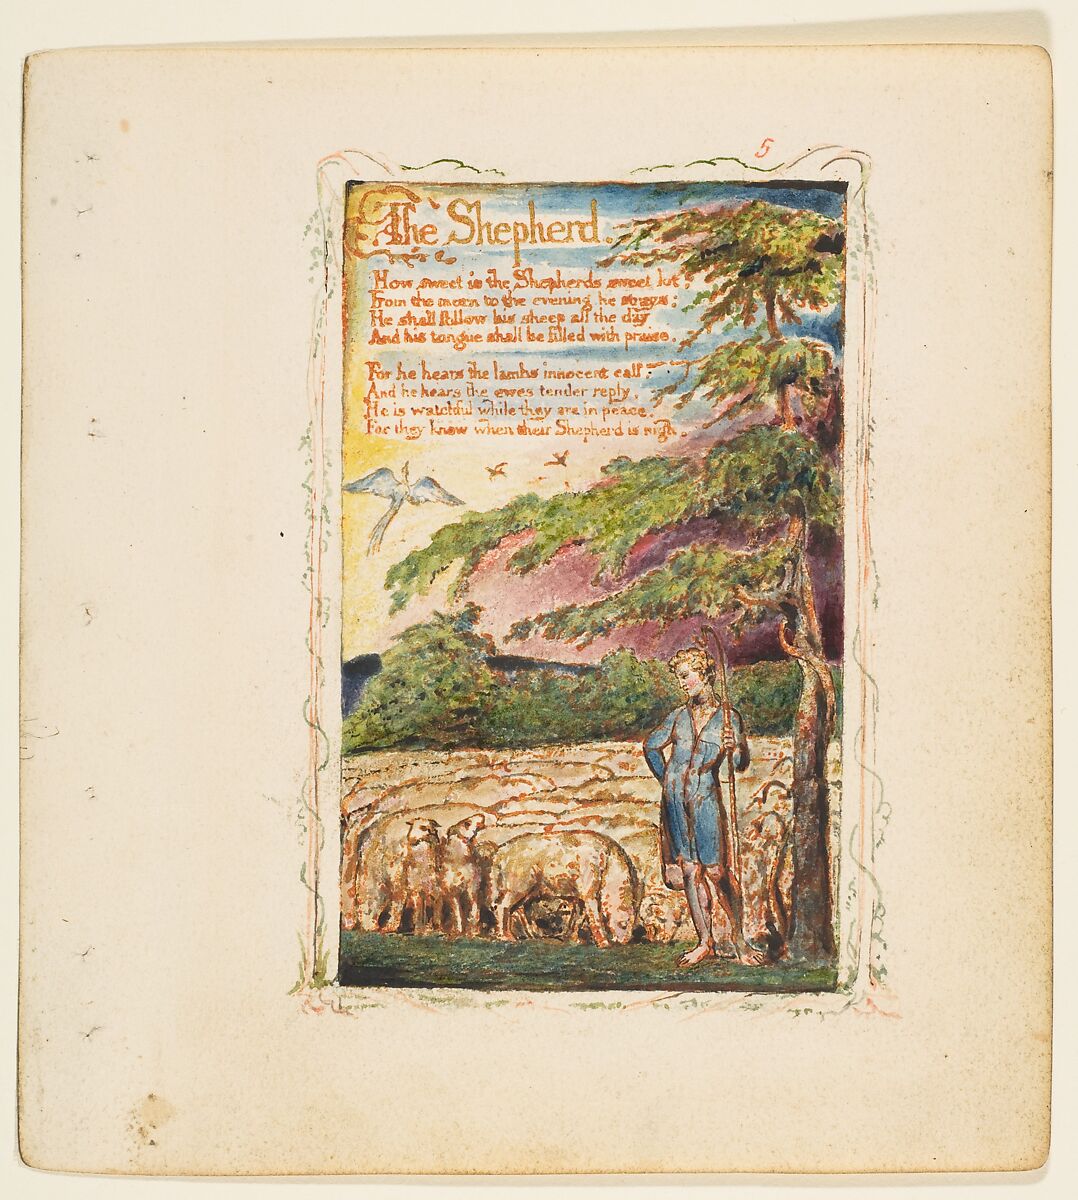 Songs of Innocence: The Shepherd, William Blake  British, Relief etching printed in orange-brown ink and hand-colored with watercolor and shell gold